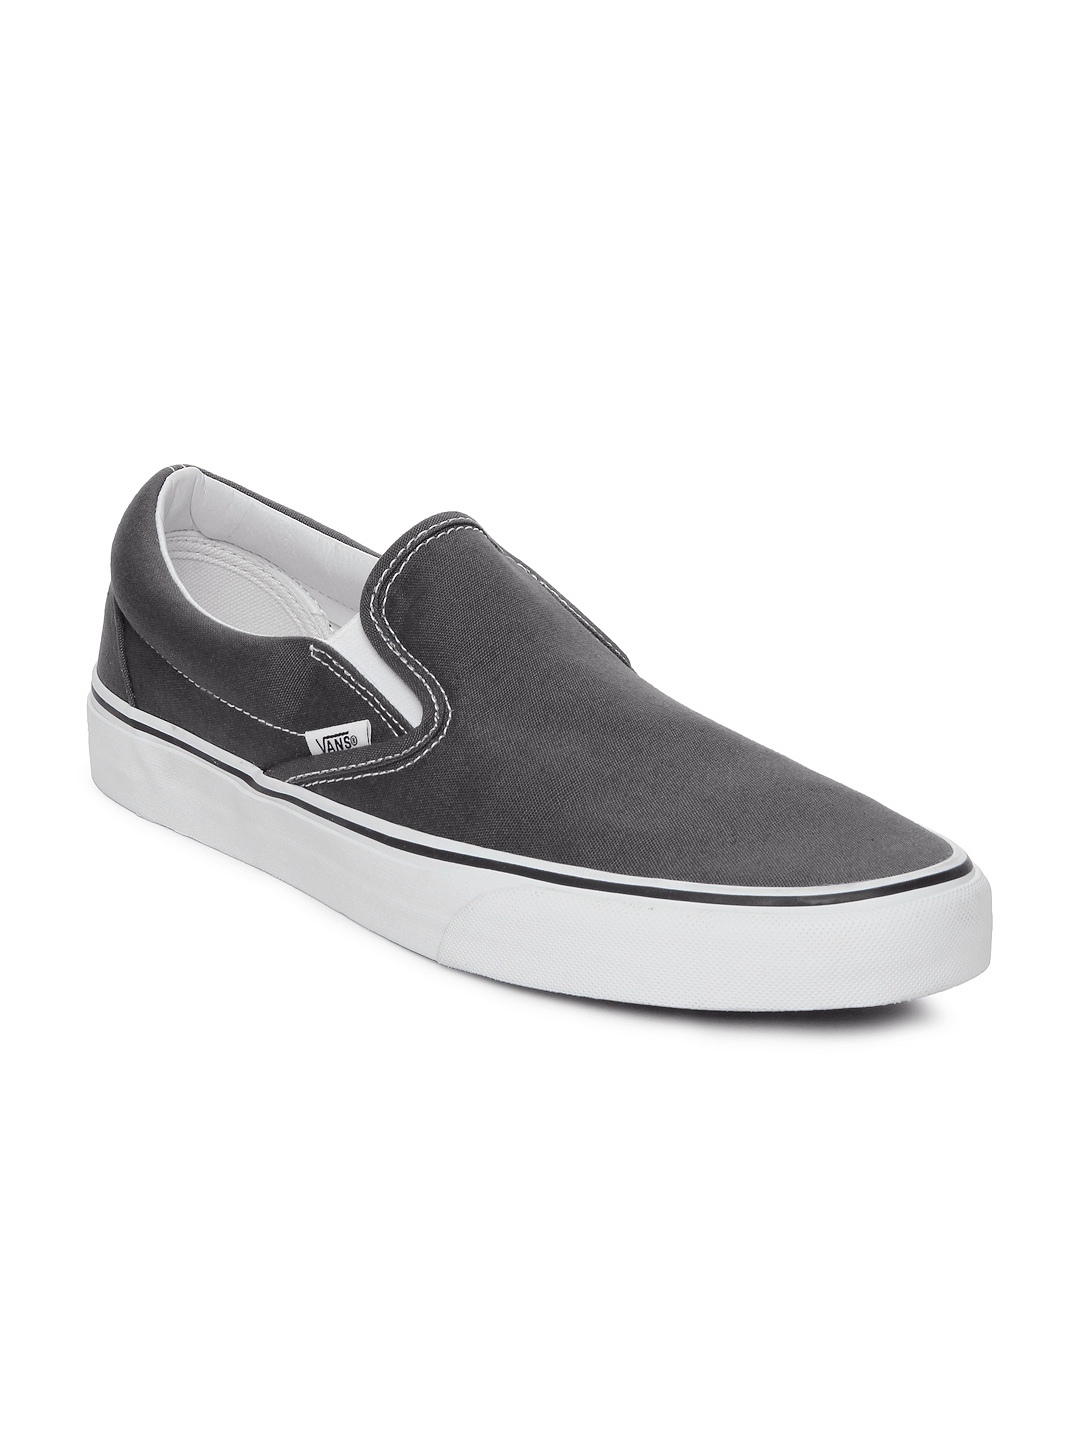 Buy Vans Men Grey Classic Slip On Casual Shoes - Casual Shoes for Men ...